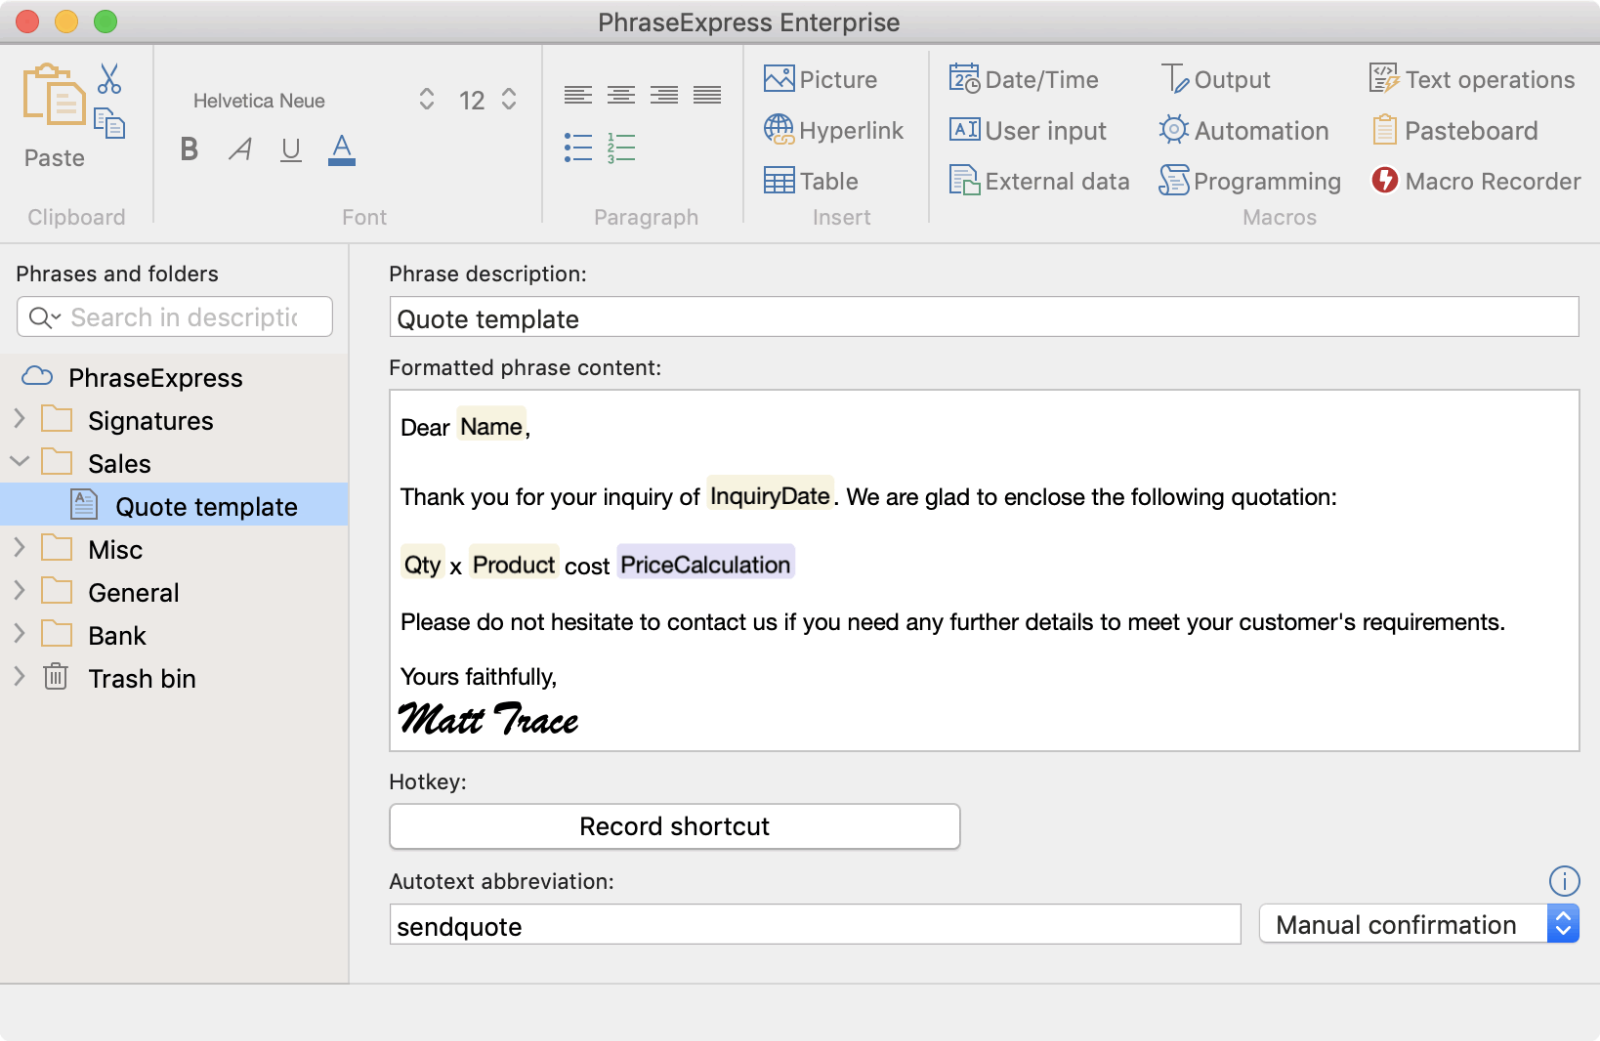 Compatible with PhraseExpress for Mac v3